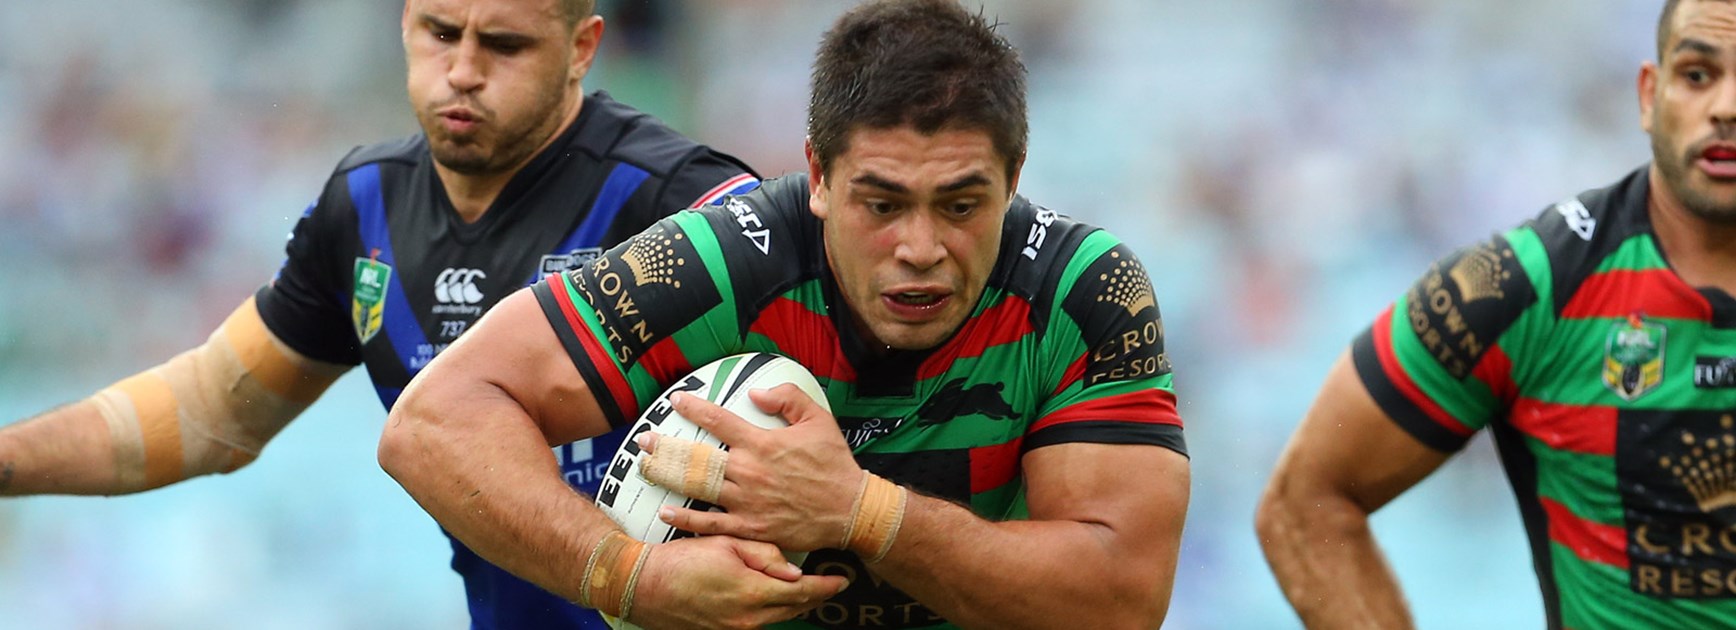 Rabbitohs forward Chris Grevsmuhl will face his former club the Cowboys in Townsville for the first time in Round 7.